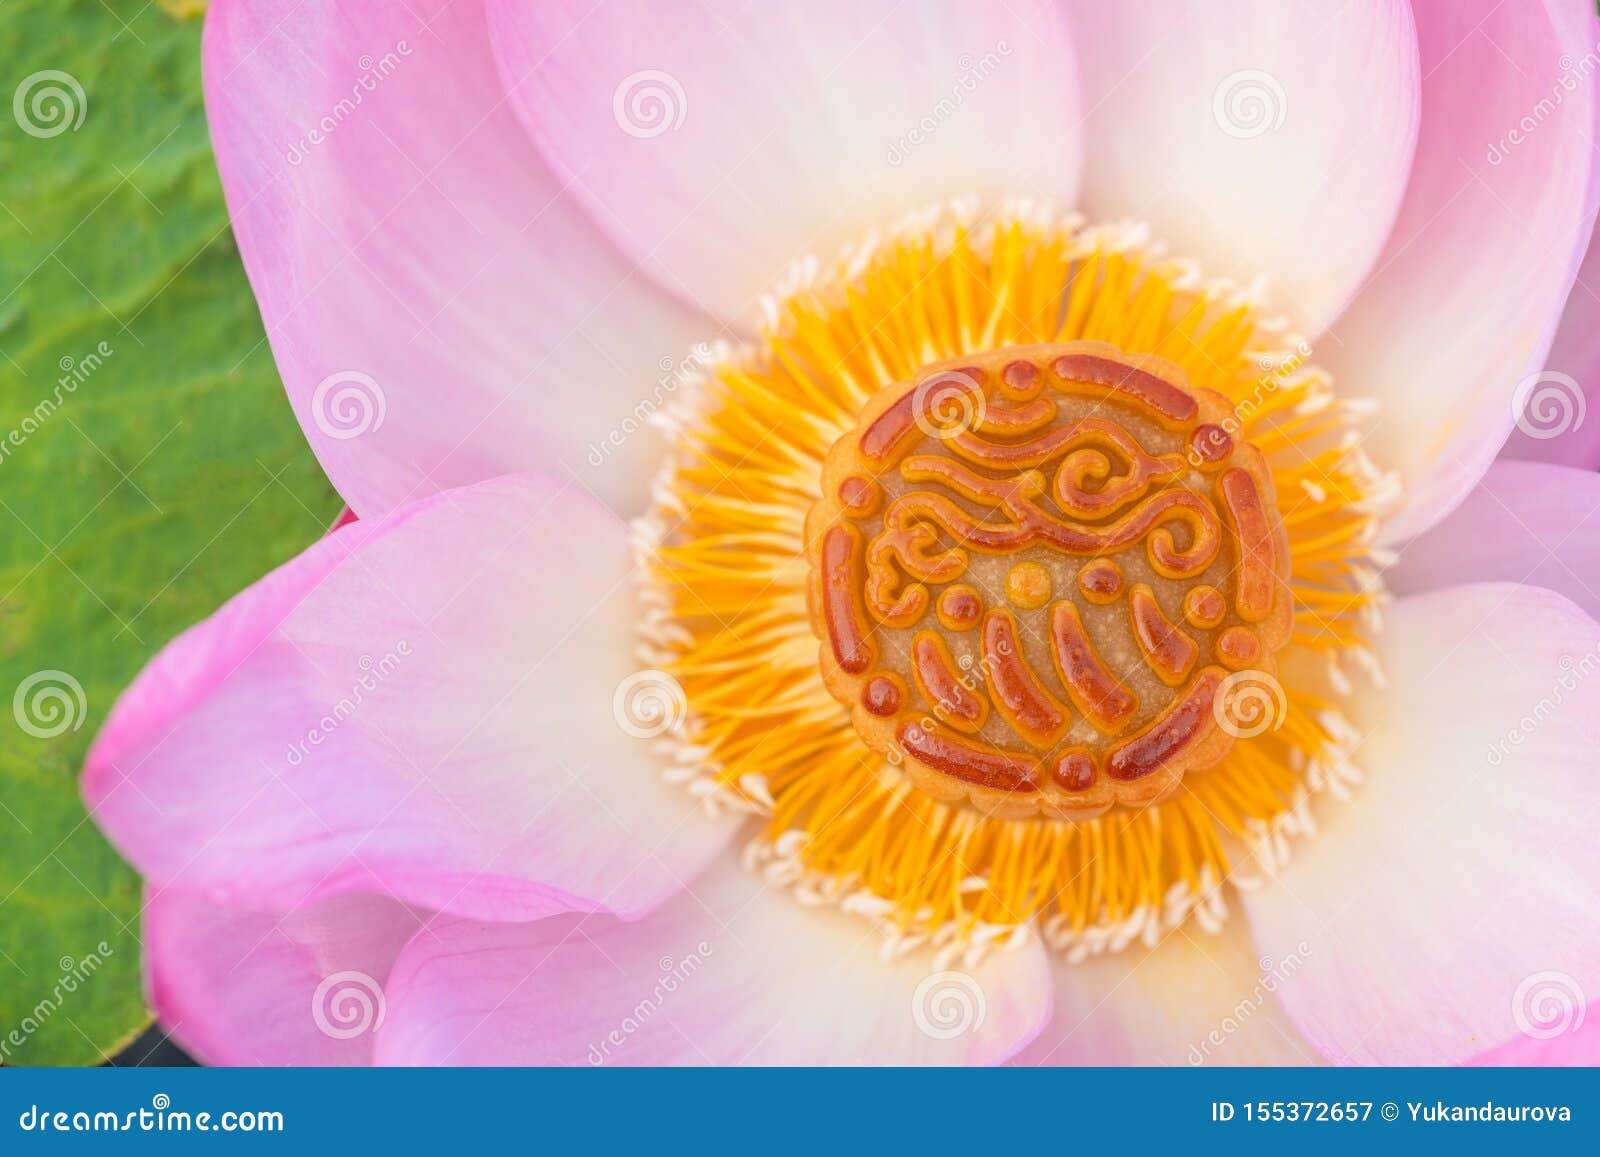 Mooncake In A Fresh Pink Lotus Flower On A Green Leaves